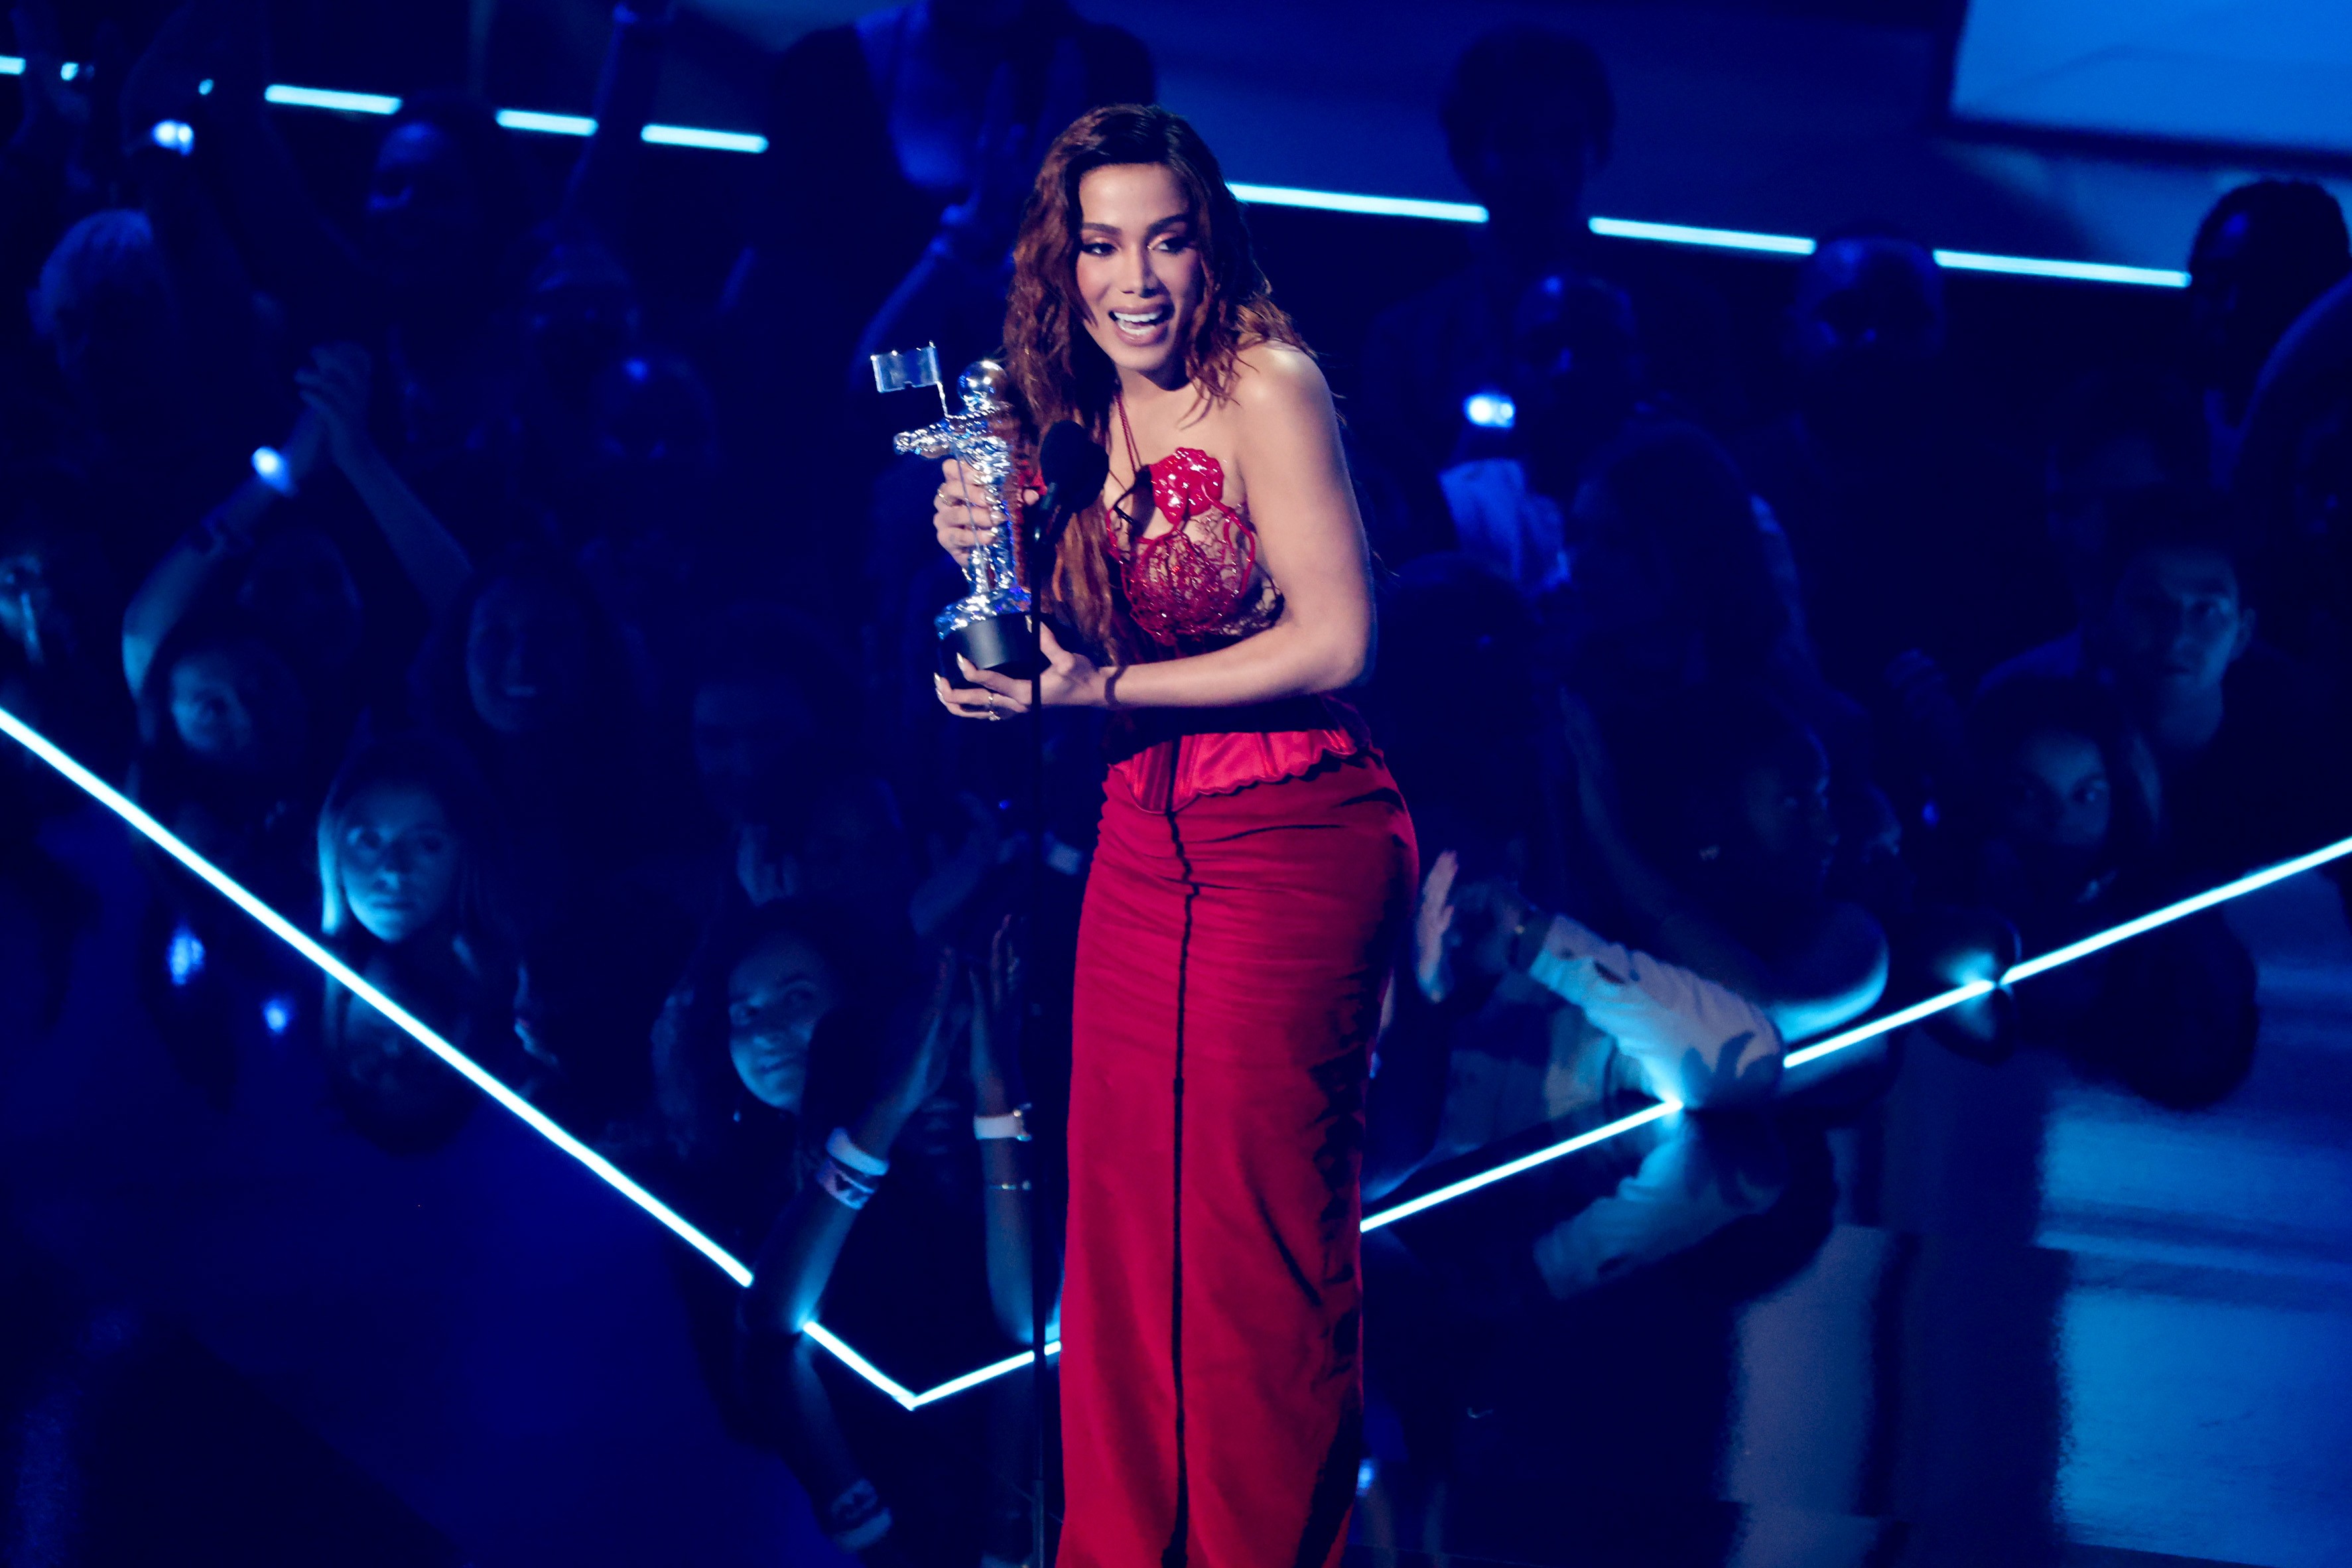 NEWARK, NEW JERSEY - AUGUST 28: Anitta accepts the Best Latin award for 'Envolver' onstage at the 2022 MTV VMAs at Prudential Center on August 28, 2022 in Newark, New Jersey. (Photo by Arturo Holmes/Getty Images) (Foto: Getty Images)